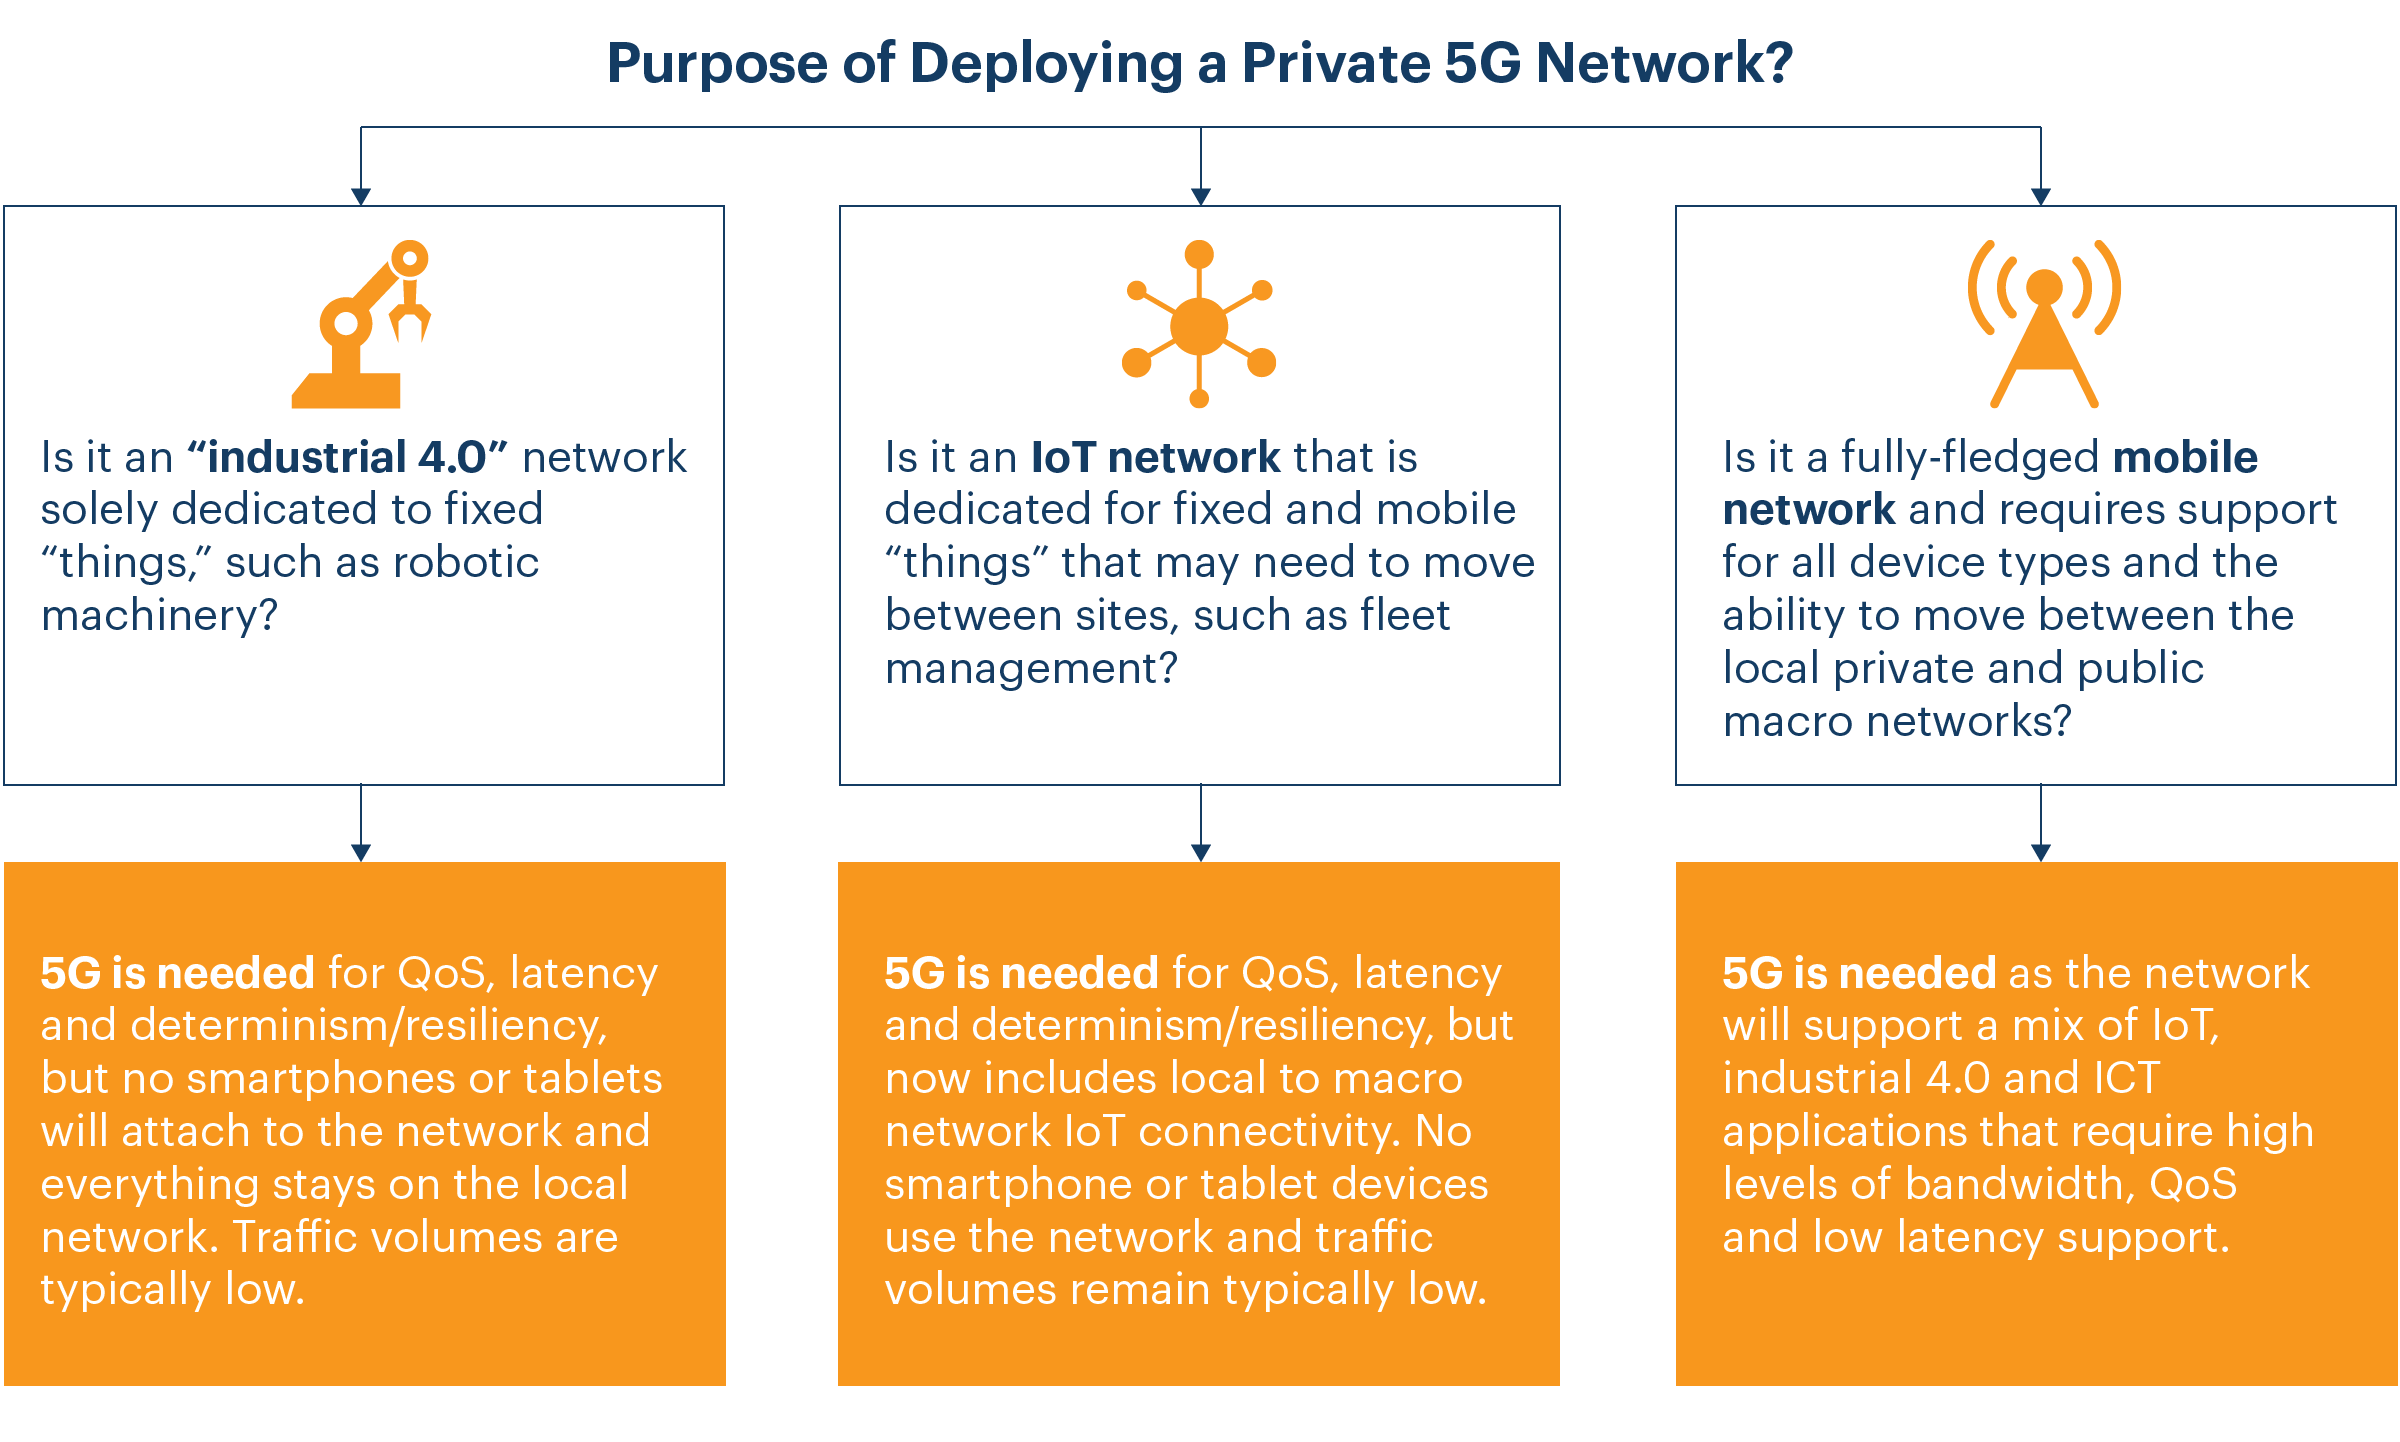 Purpose of Deploying a Private 5G Network flow chart